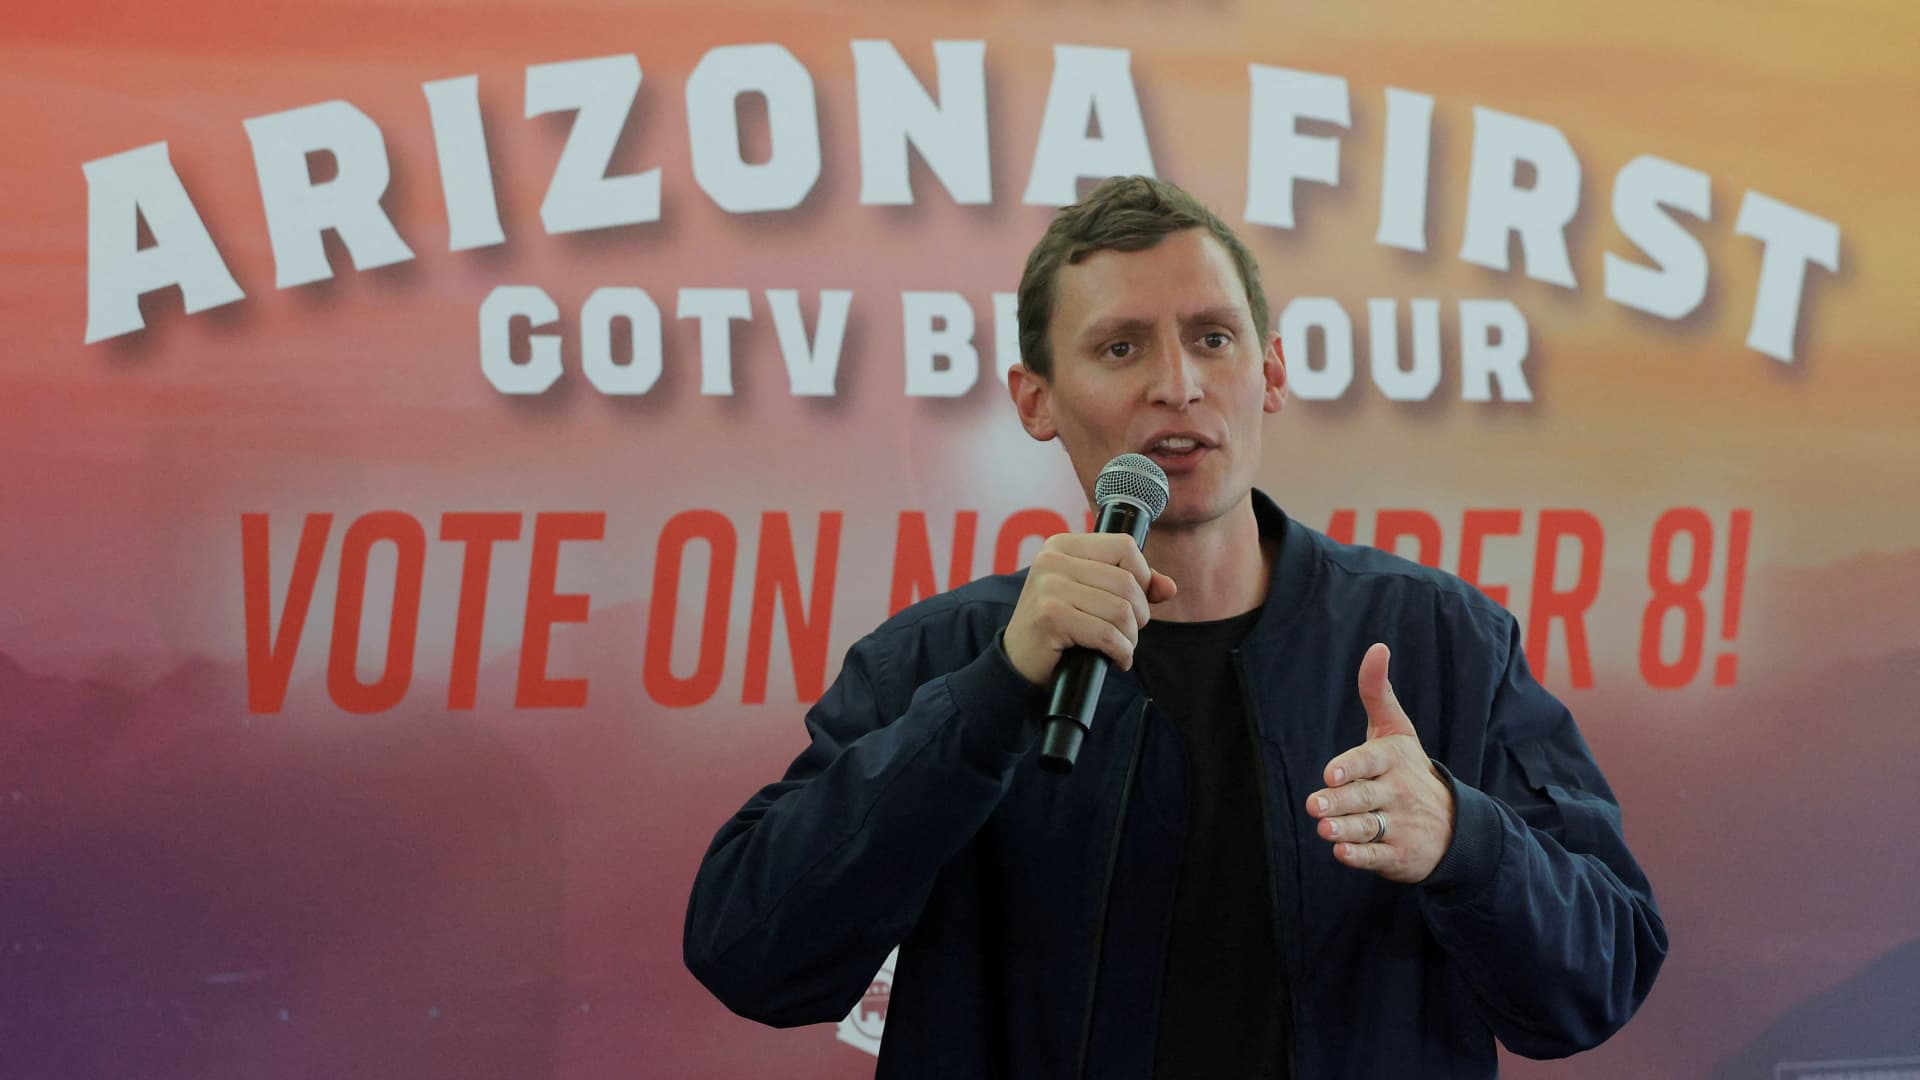 Republican candidate for the U.S. Senate Blake Masters speaks during a campaign stop on the Arizona First GOTV Bus Tour, ahead of the midterm elections, in Phoenix, Arizona, November 7, 2022.